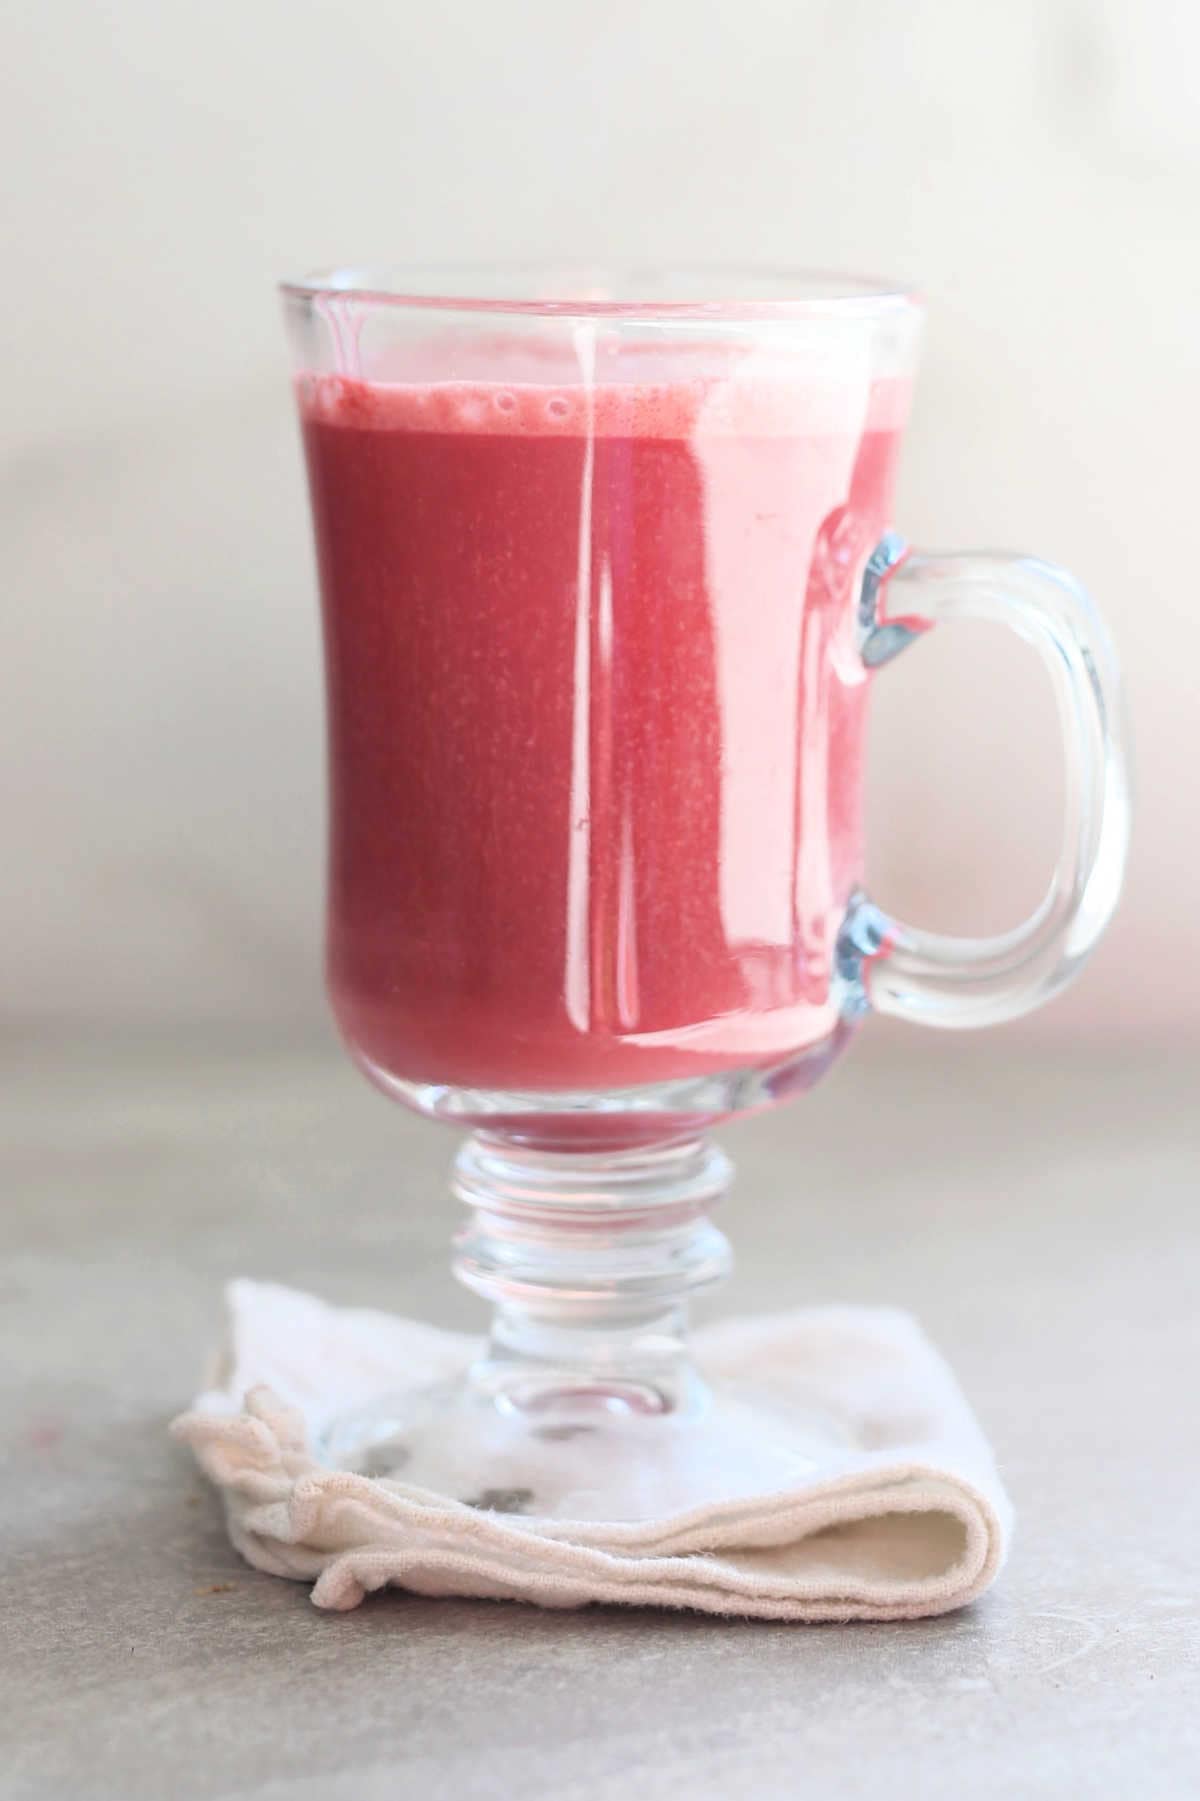 beet latte in a glass mug on a towel